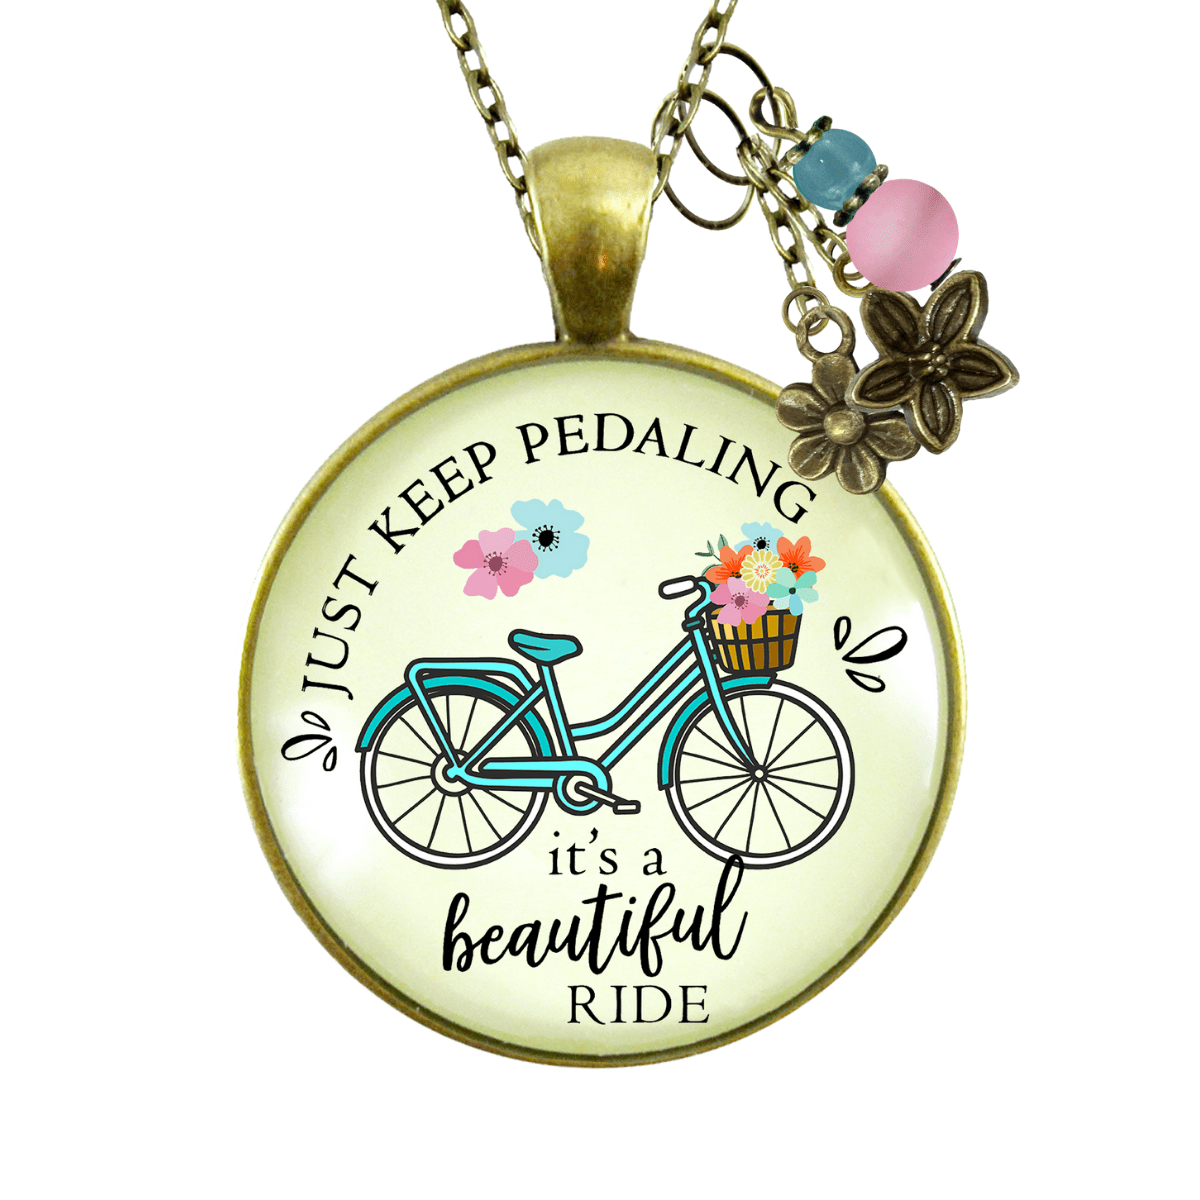 Just Keep Pedaling Bicycle Necklace Beautiful Ride Summer Boho Chic Colorful Pendant Flower Charms  Necklace - Gutsy Goodness Handmade Jewelry